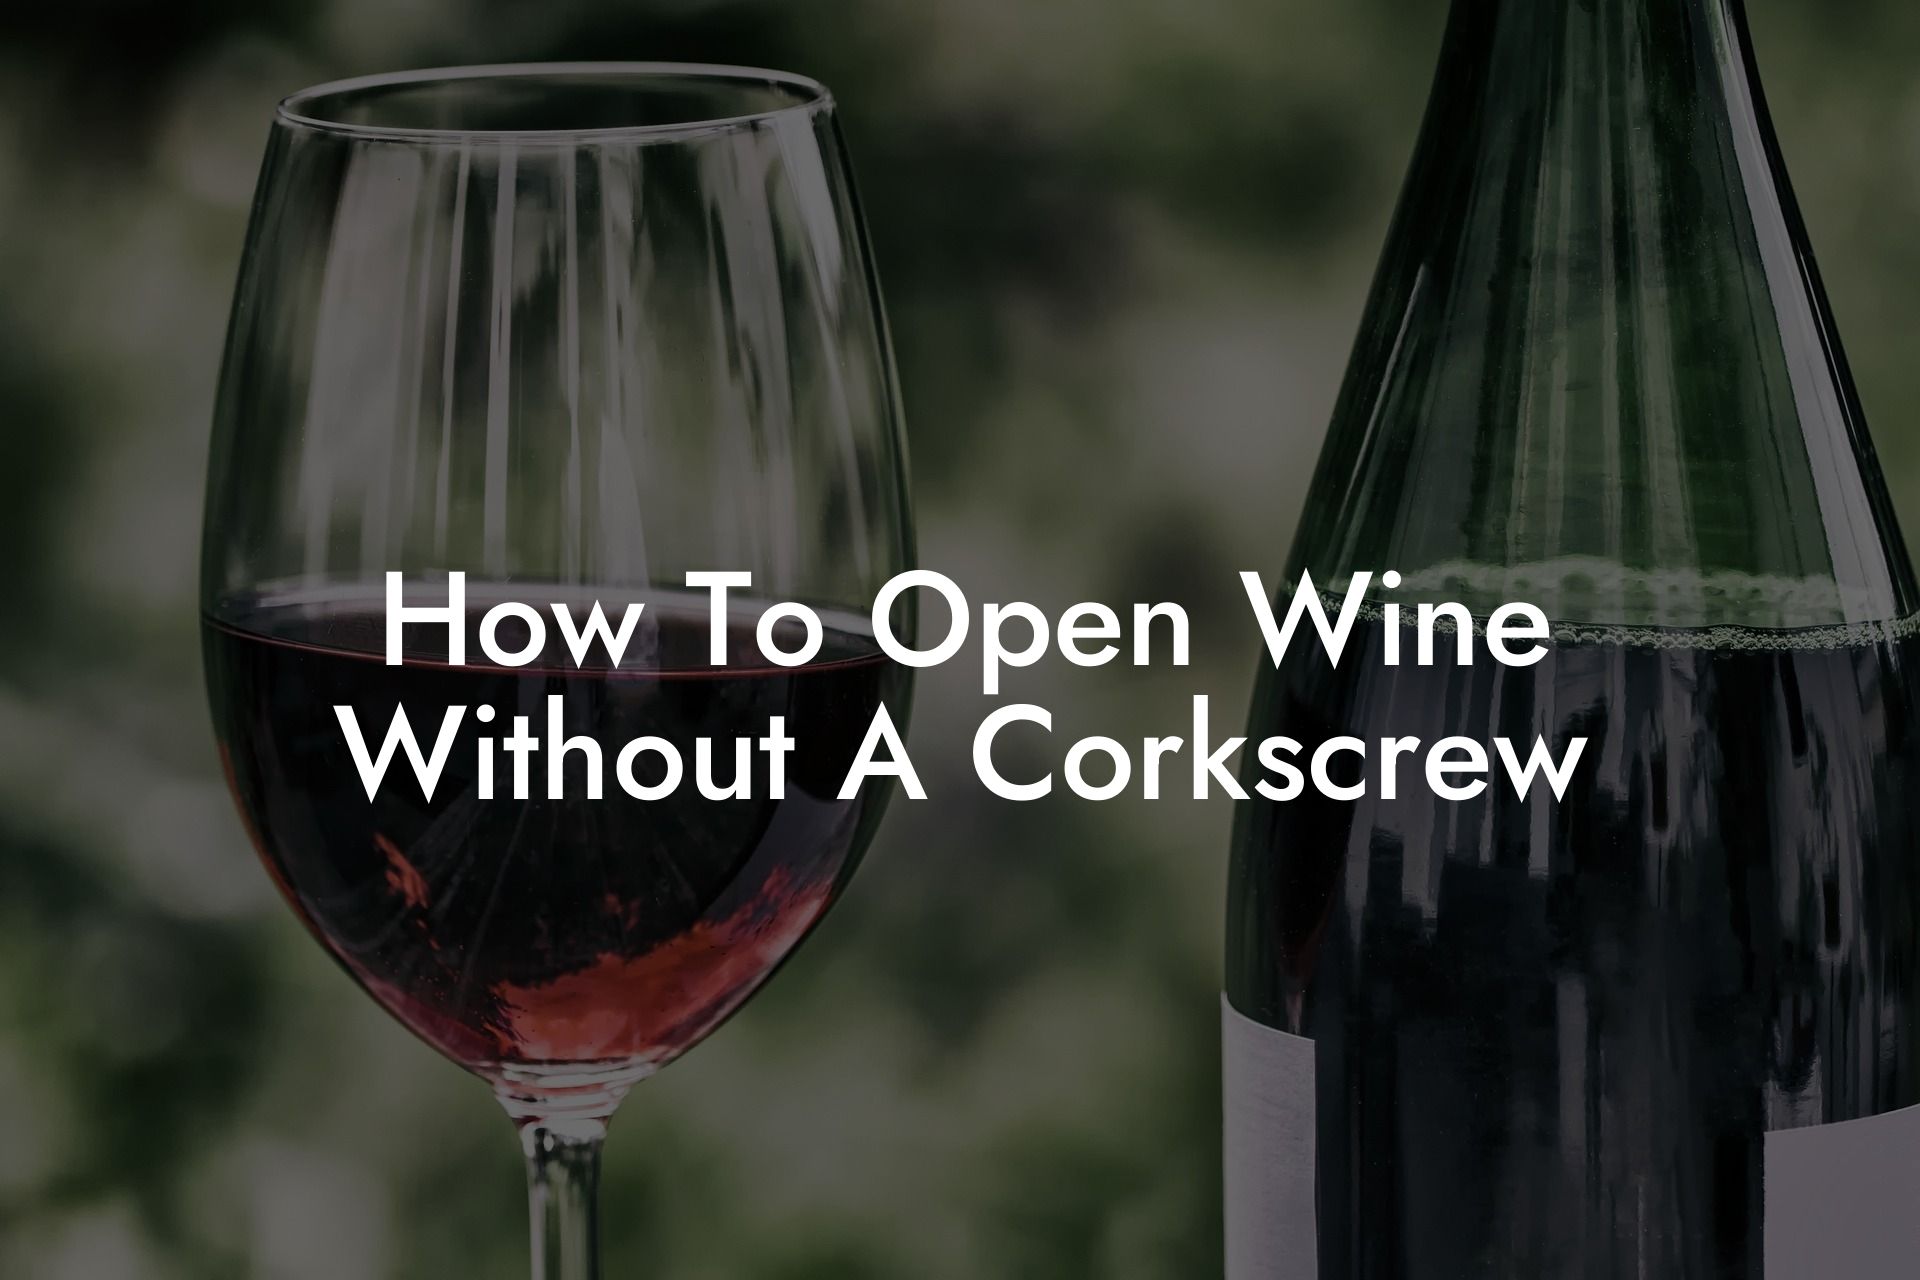 How To Open Wine Without A Corkscrew